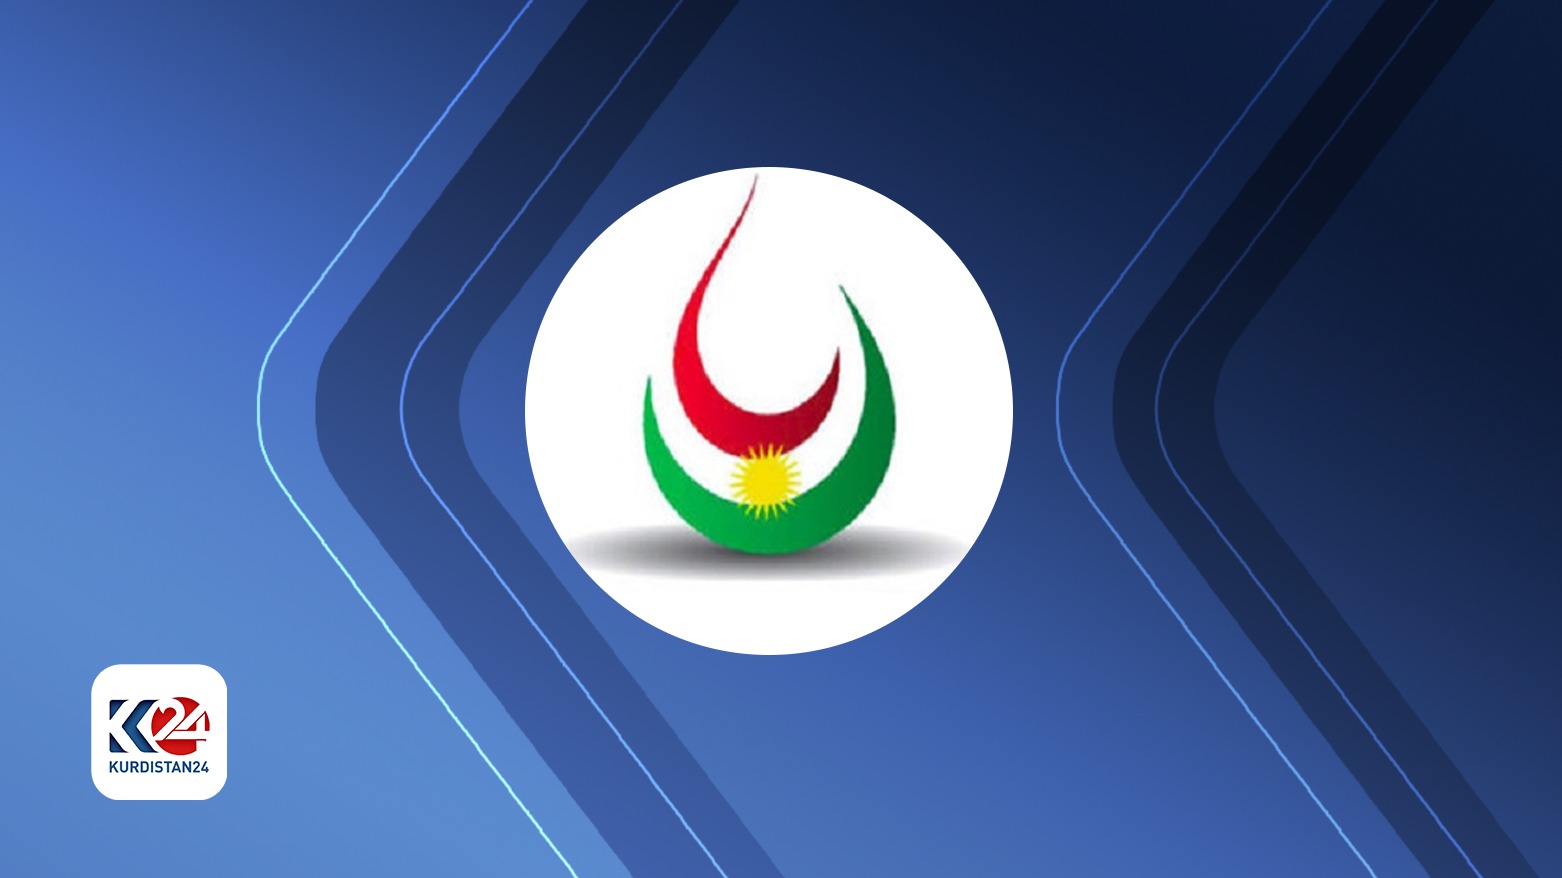 The logo of the Ministry of Natural Resources of the Kurdistan Regional Government (KRG). (Photo designed by Kurdistan 24)